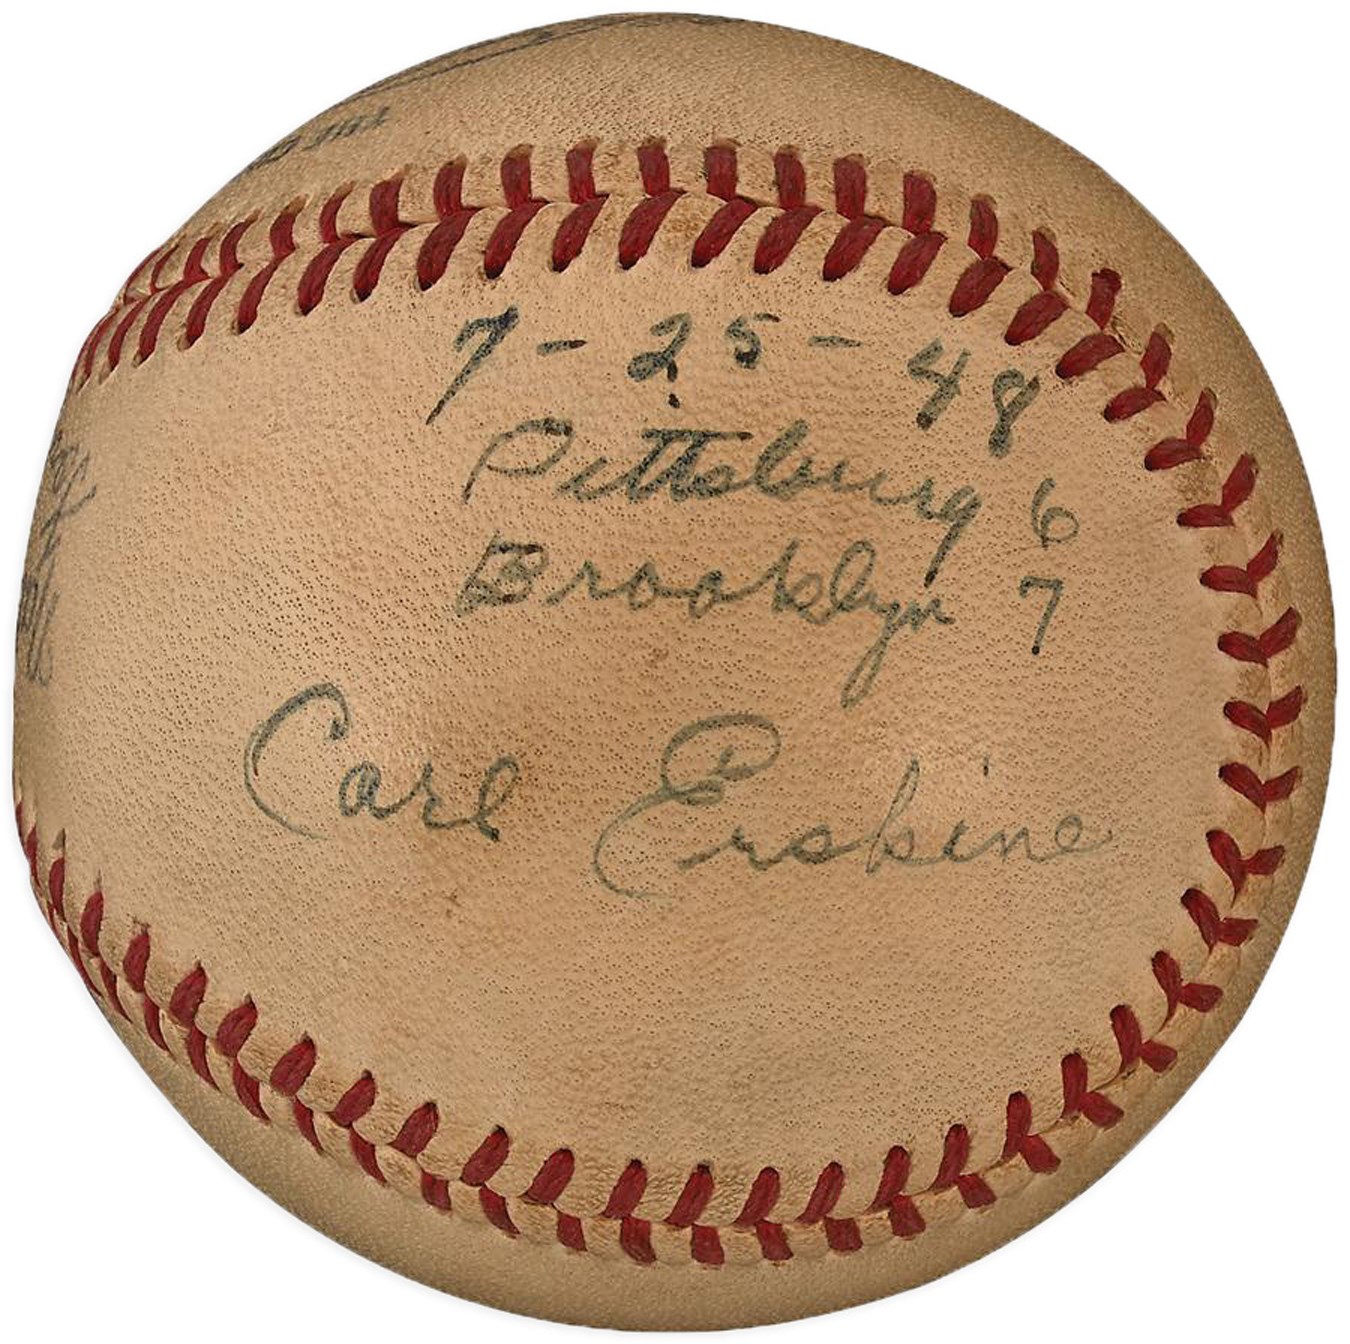 - 1948 Carl Erskine Last Out Baseball from His First Career Win (PSA)